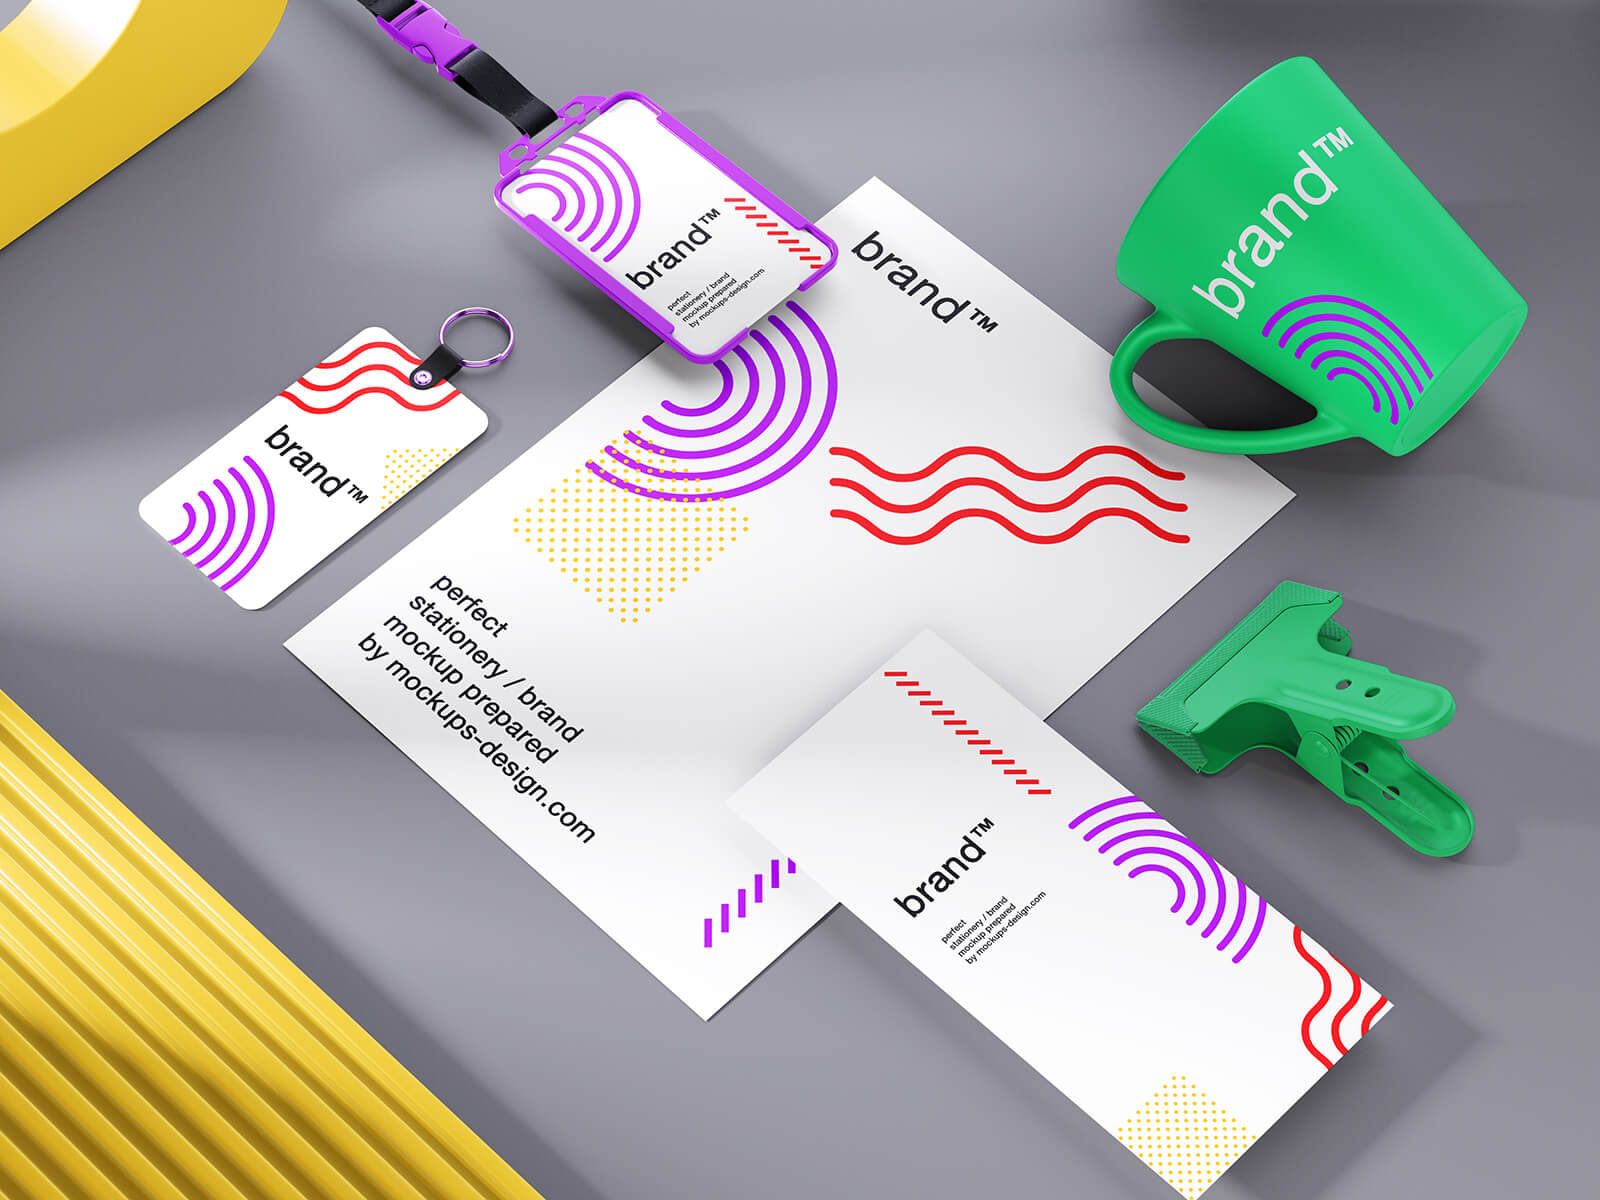 Free Colorful Corporate Branding Stationery Mockup PSD